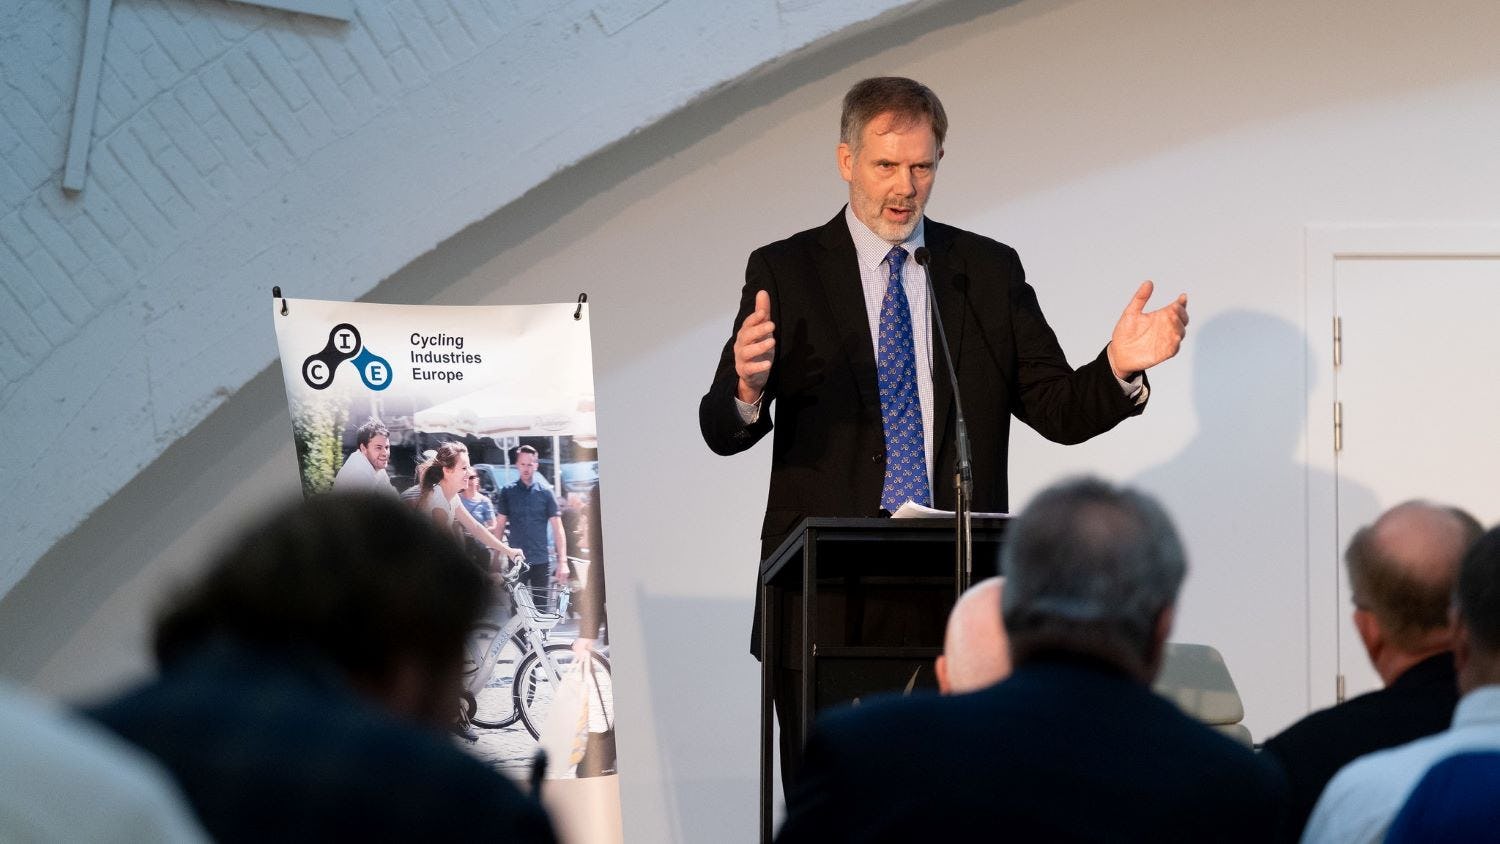 “If Europe wants to kick start the Green Deal and get out of Russian oil rapidly then cycling is the fast track,” declared CEO of CIE, Kevin Mayne. – Photo Cycling Industries Europe